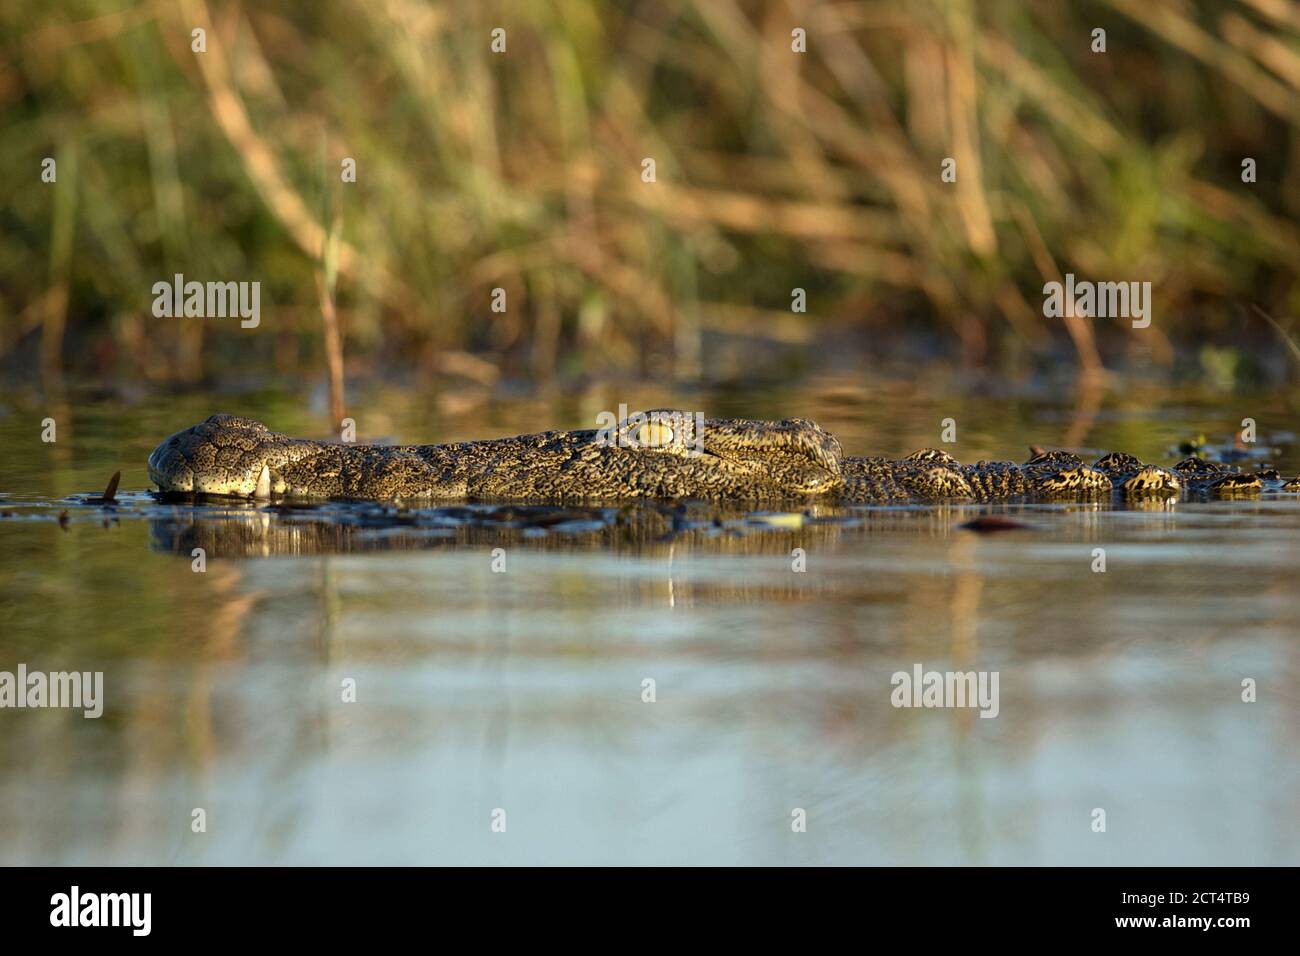 Close up of a Nile crocodile in Africa. Stock Photo